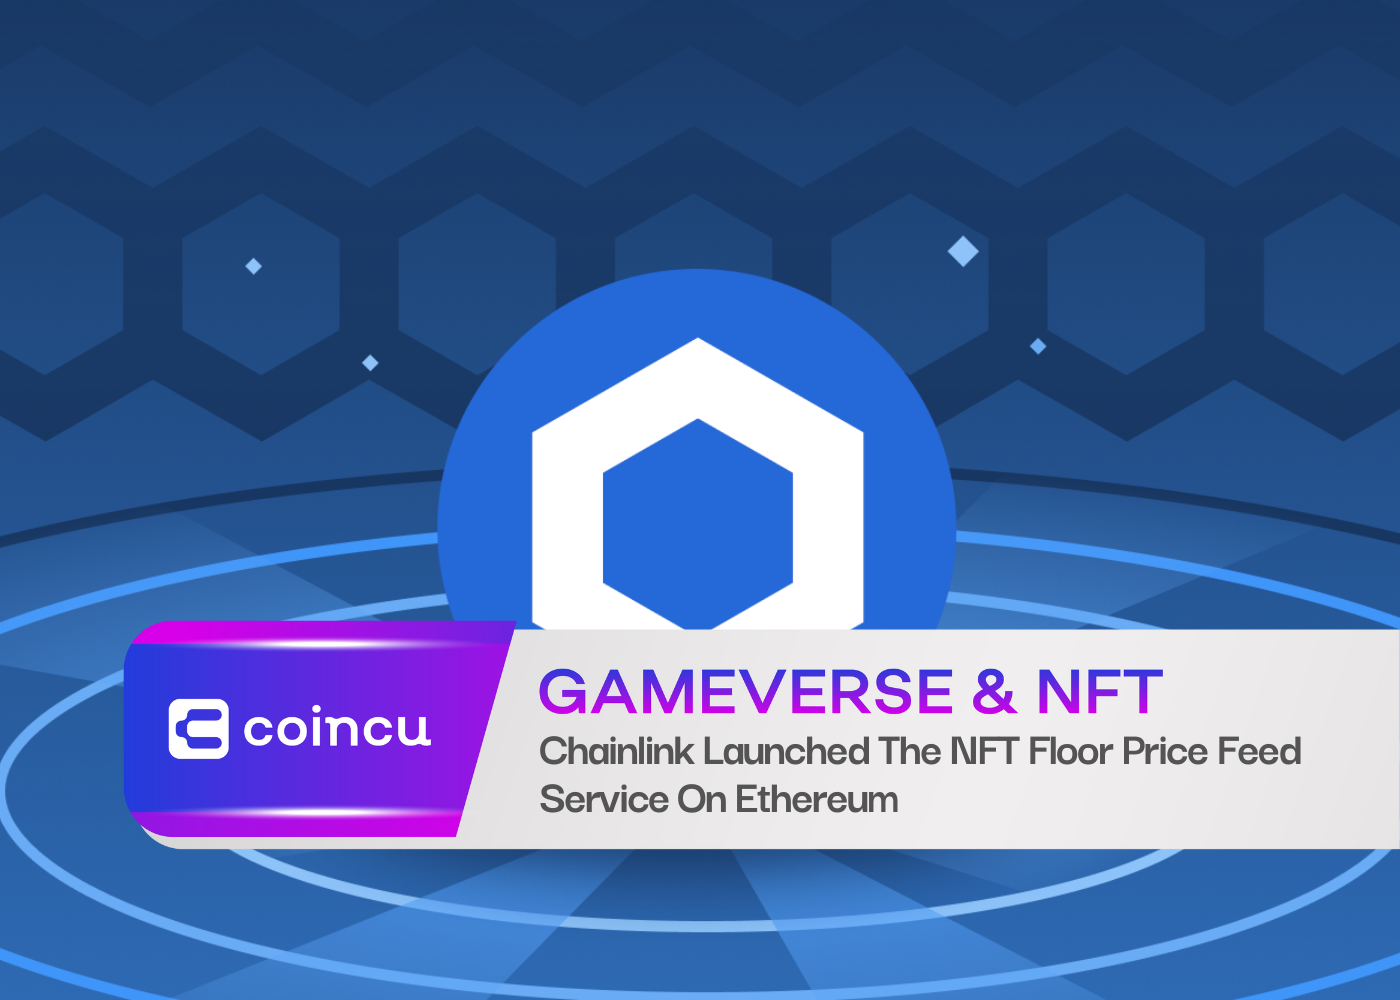 Chainlink Launched The NFT Floor Price Feed Service On Ethereum